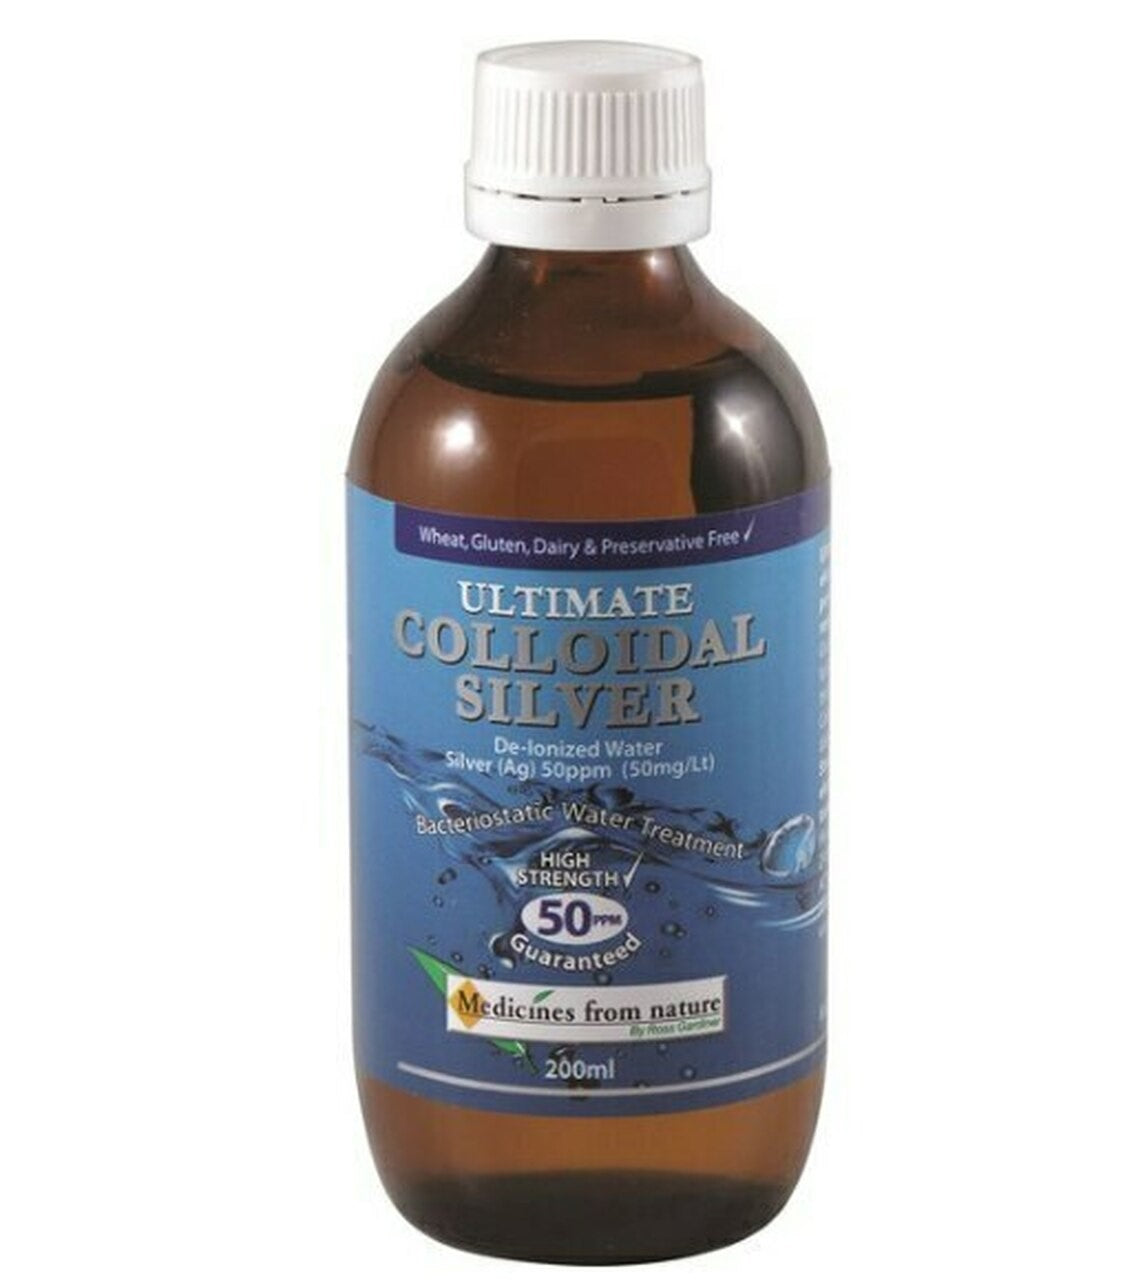 Is Colloidal Silver Good For You?